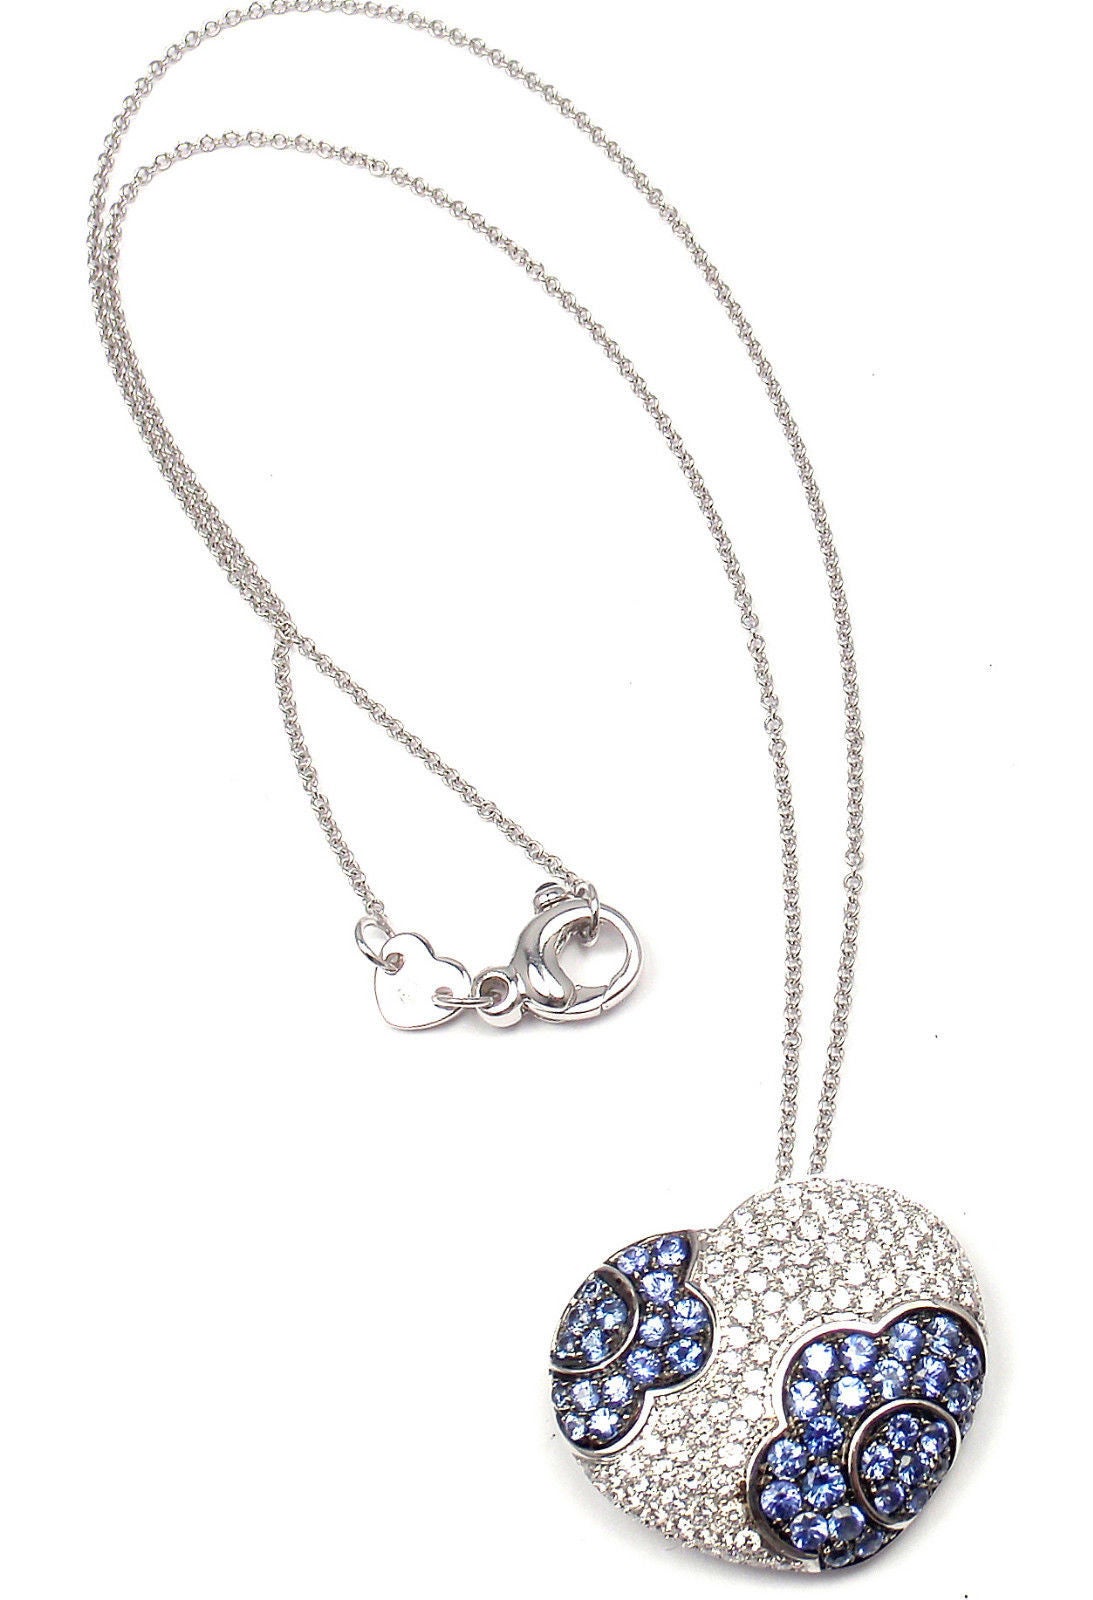 18k White Gold Petals Diamond And Sapphire Heart Necklace by Pasquale Bruni. 

With round brilliant cut diamonds total weight approx. 1.24ct Sapphires 1.85ct
This necklace comes with Box, Certificate and Tag.

Details:
Length: 17.5